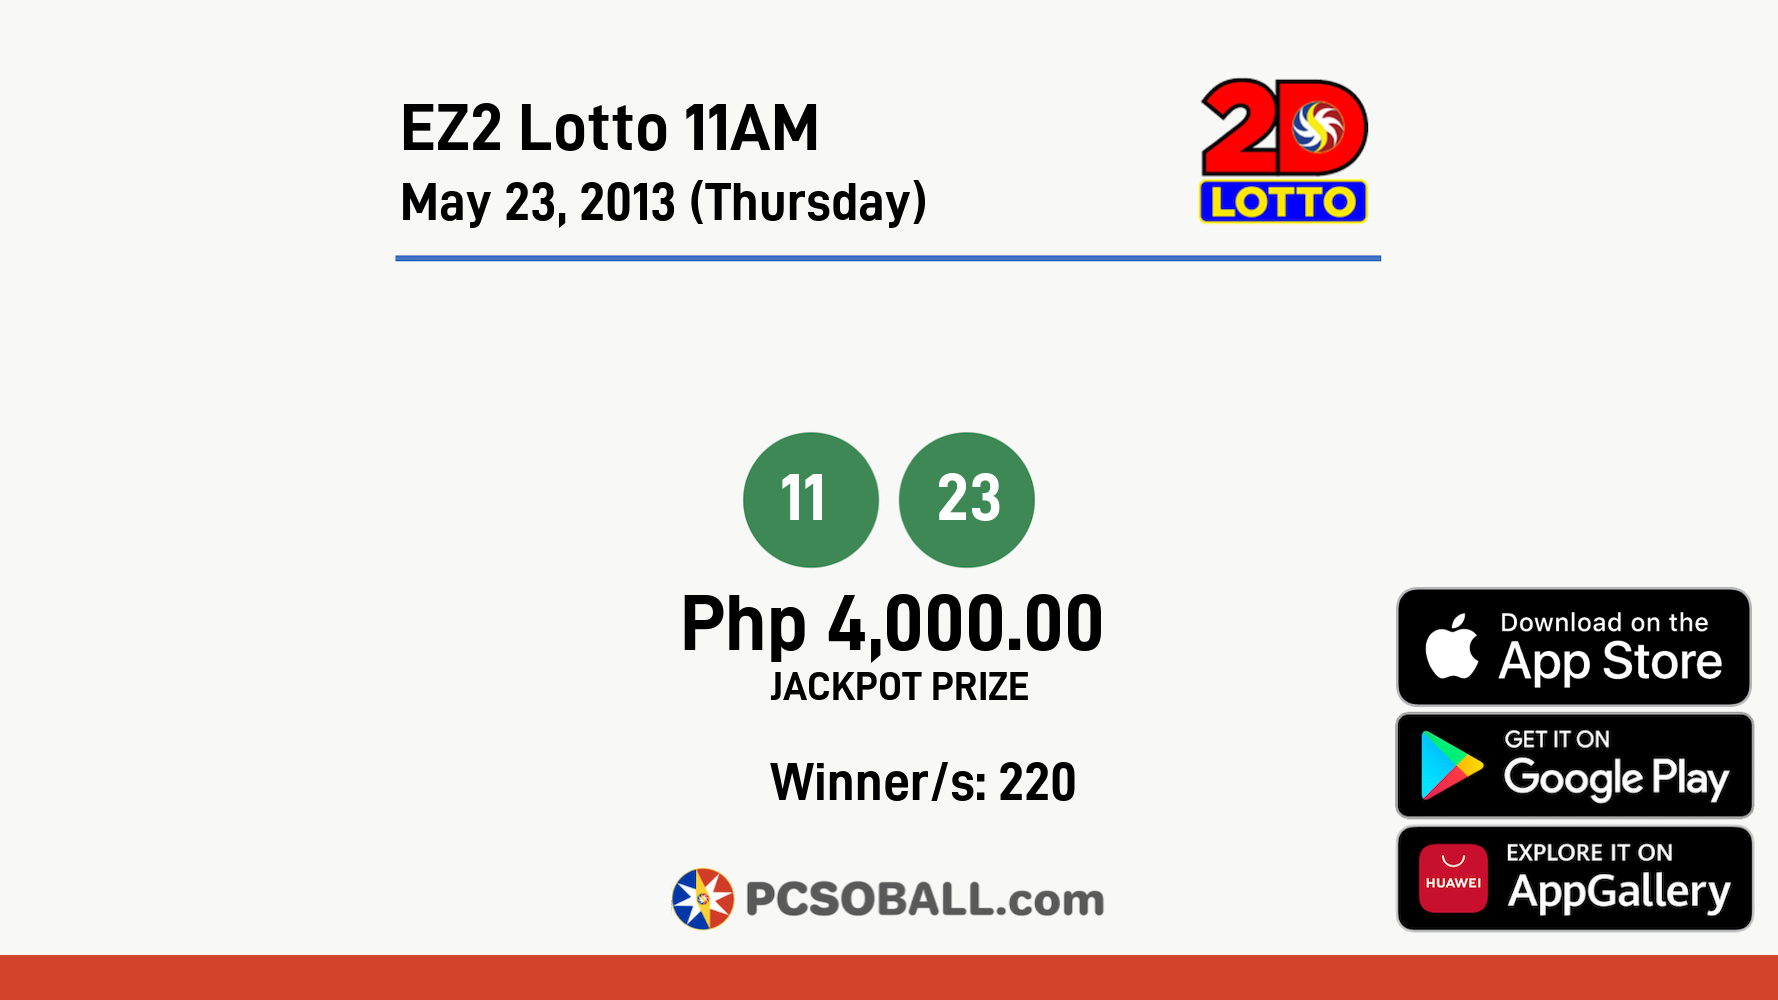 EZ2 Lotto 11AM May 23, 2013 (Thursday) Result